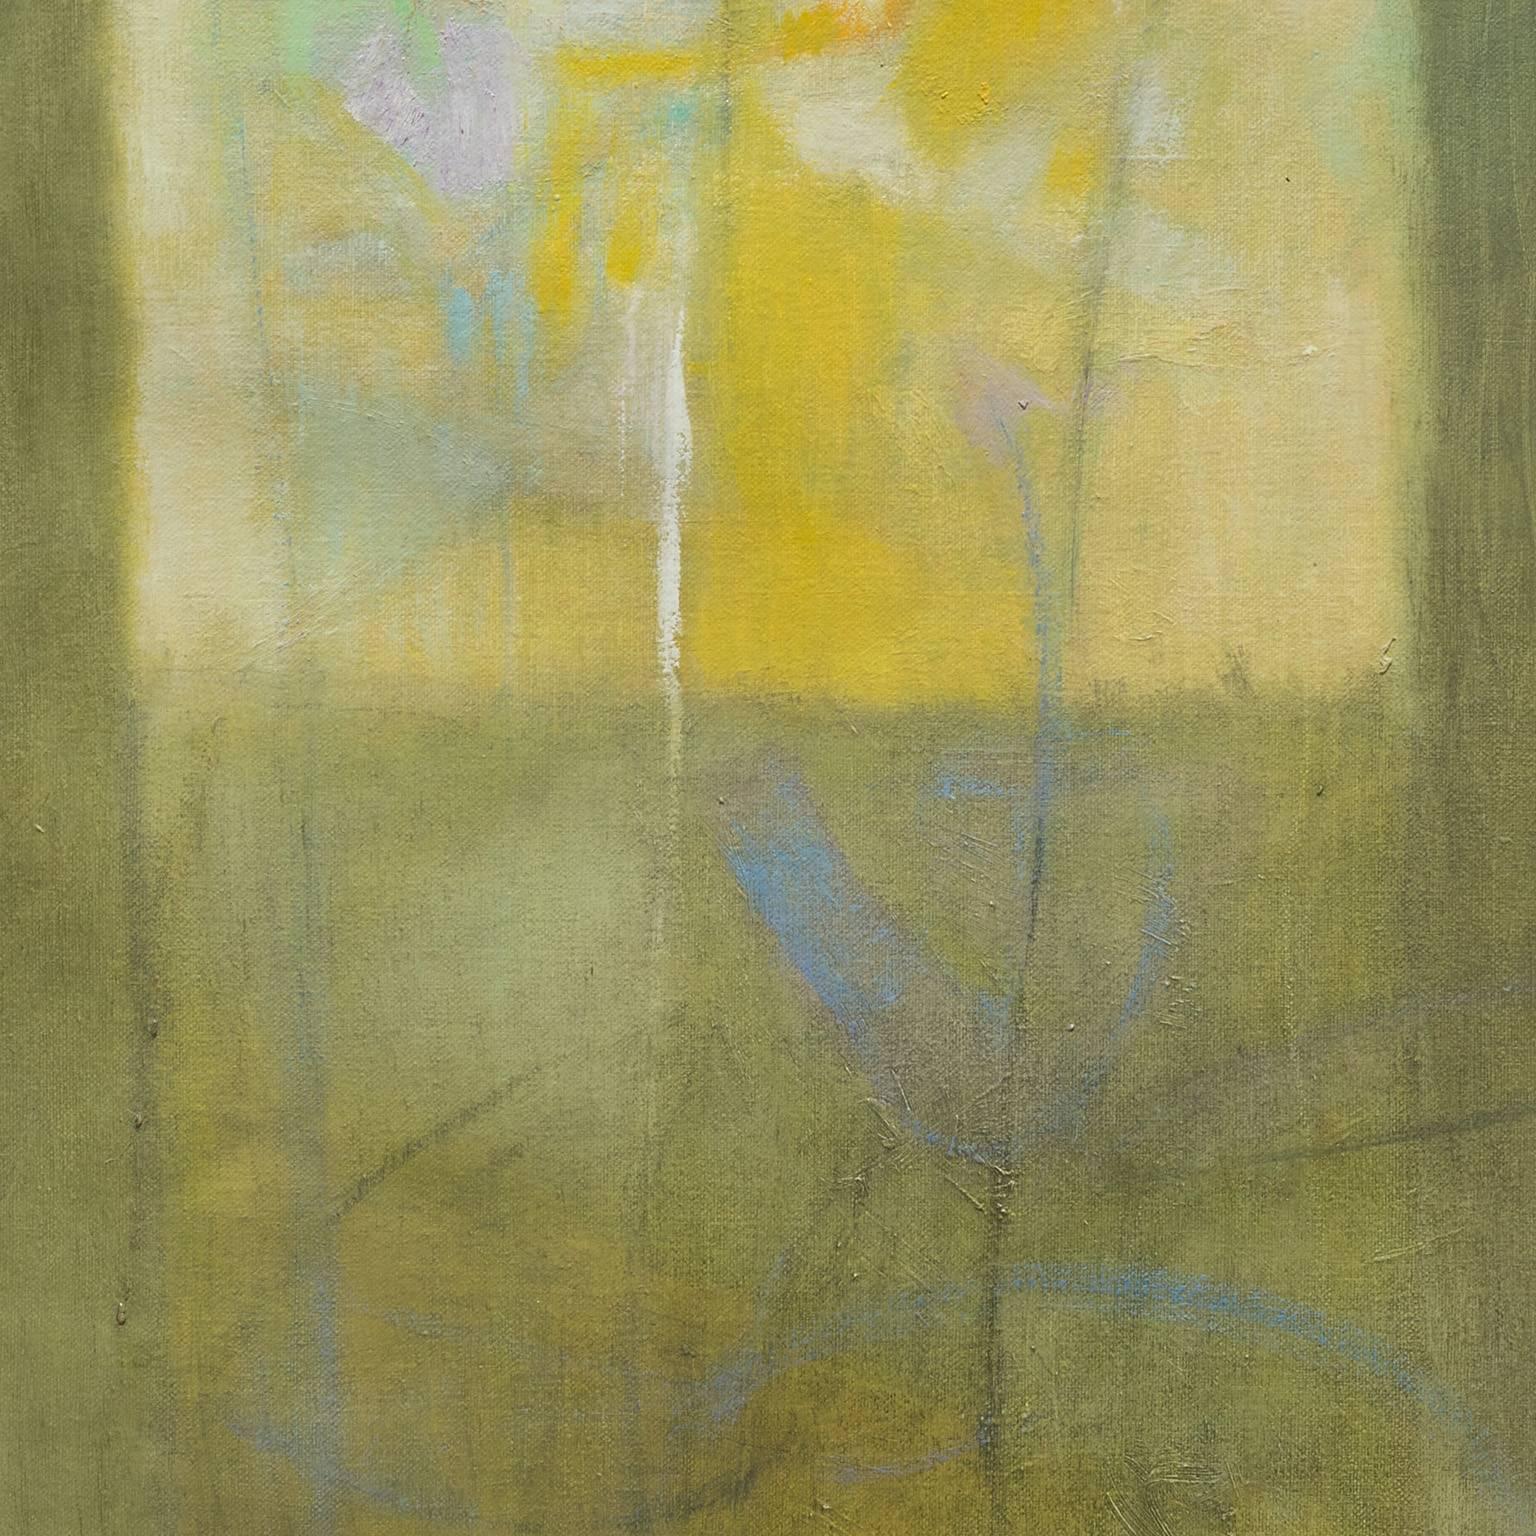  Alfredo Aya's Vitrales Amarillo 4 (The Yellow Stained-Glass Window) is a 35 x 27 inch abstract oil painting on canvas. The main colors are green and yellow of a pastel delicacy. Aya gave the painting a particular luminosity that stems from the